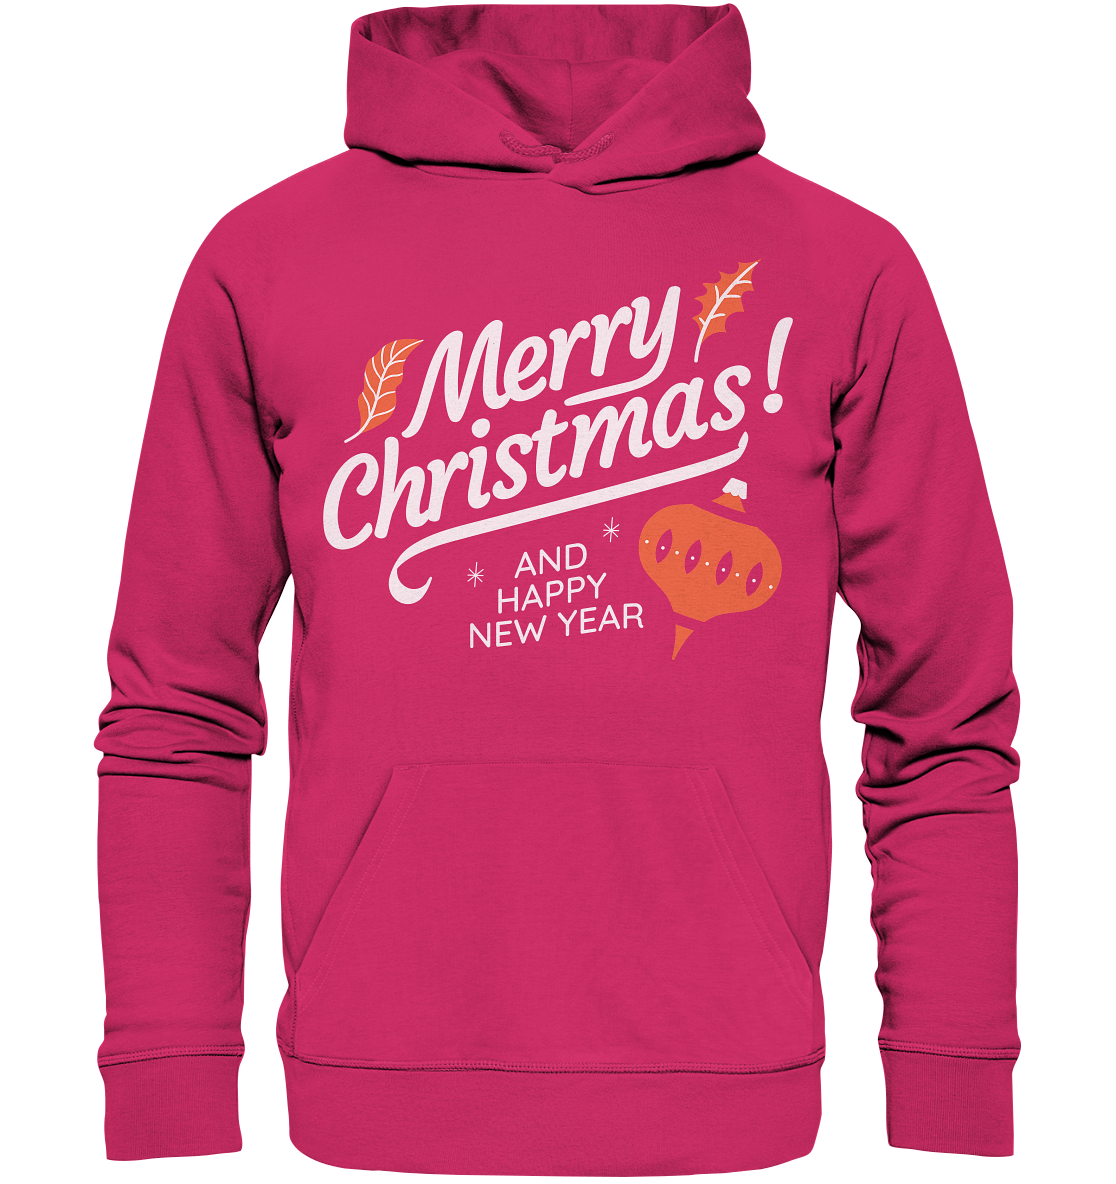 Merry Christmas and Happy New Year ,Merry Christmas and Happy New Year - Organic Basic Hoodie